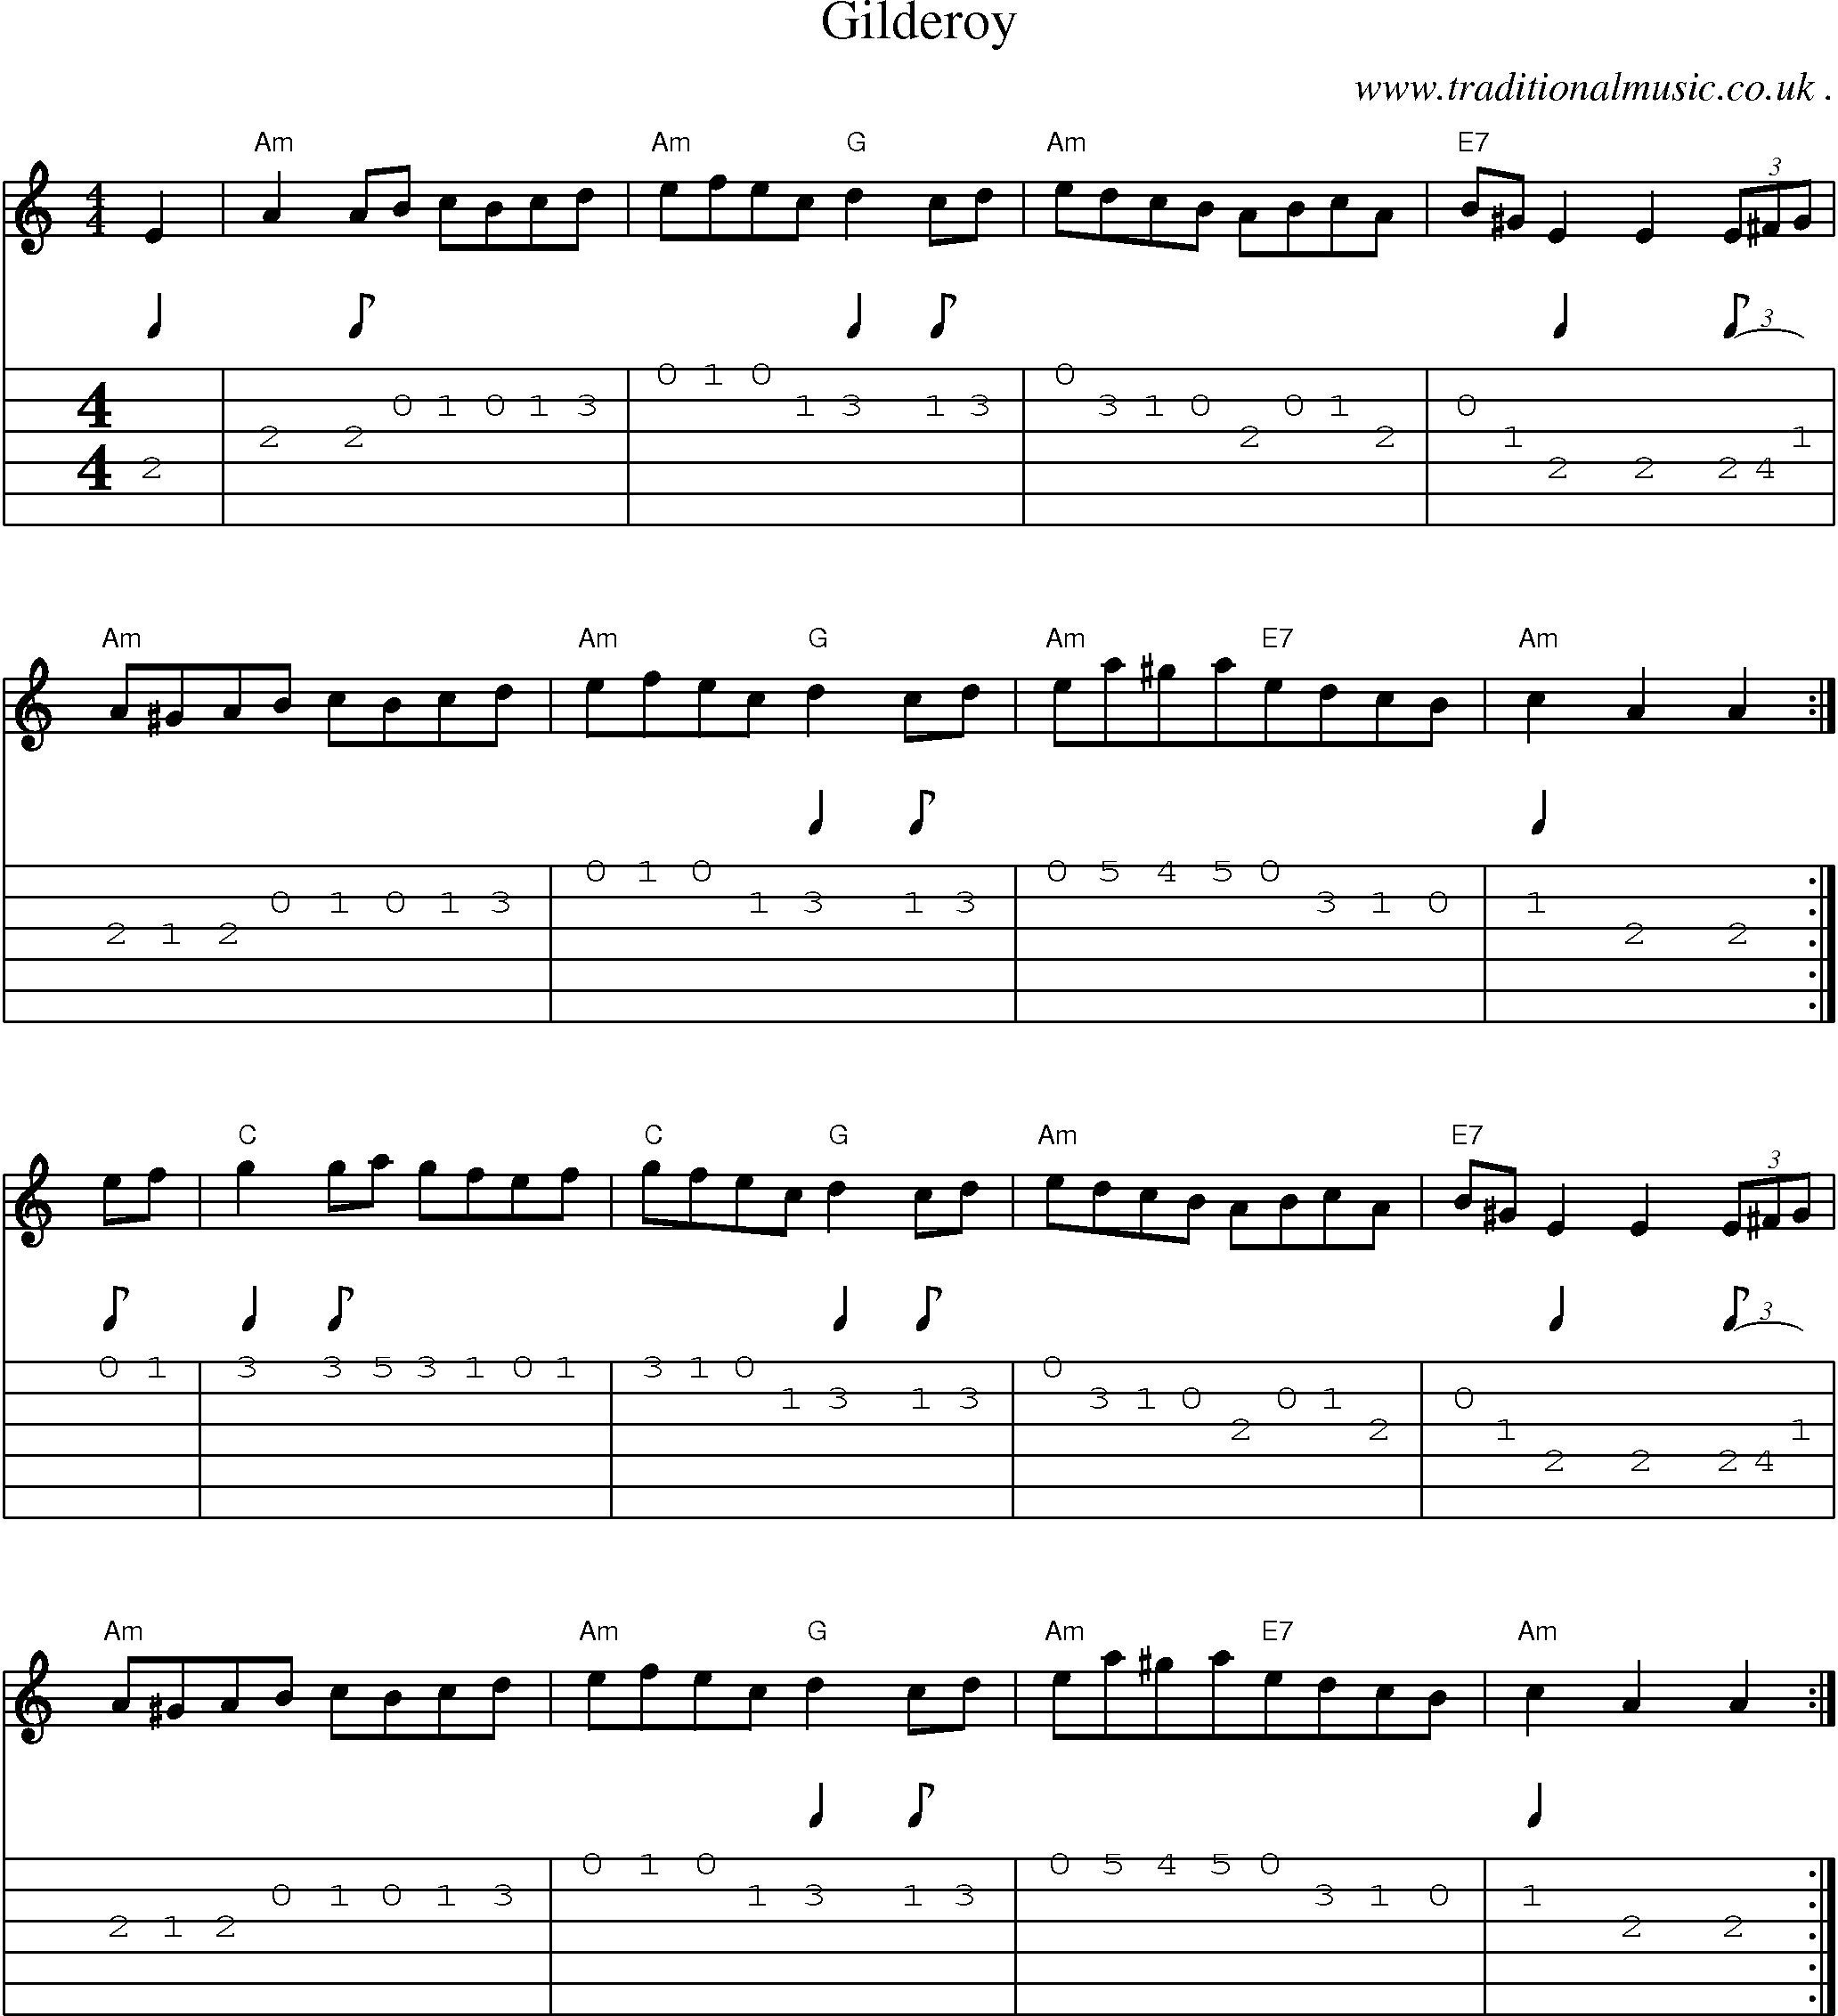 Sheet-Music and Guitar Tabs for Gilderoy